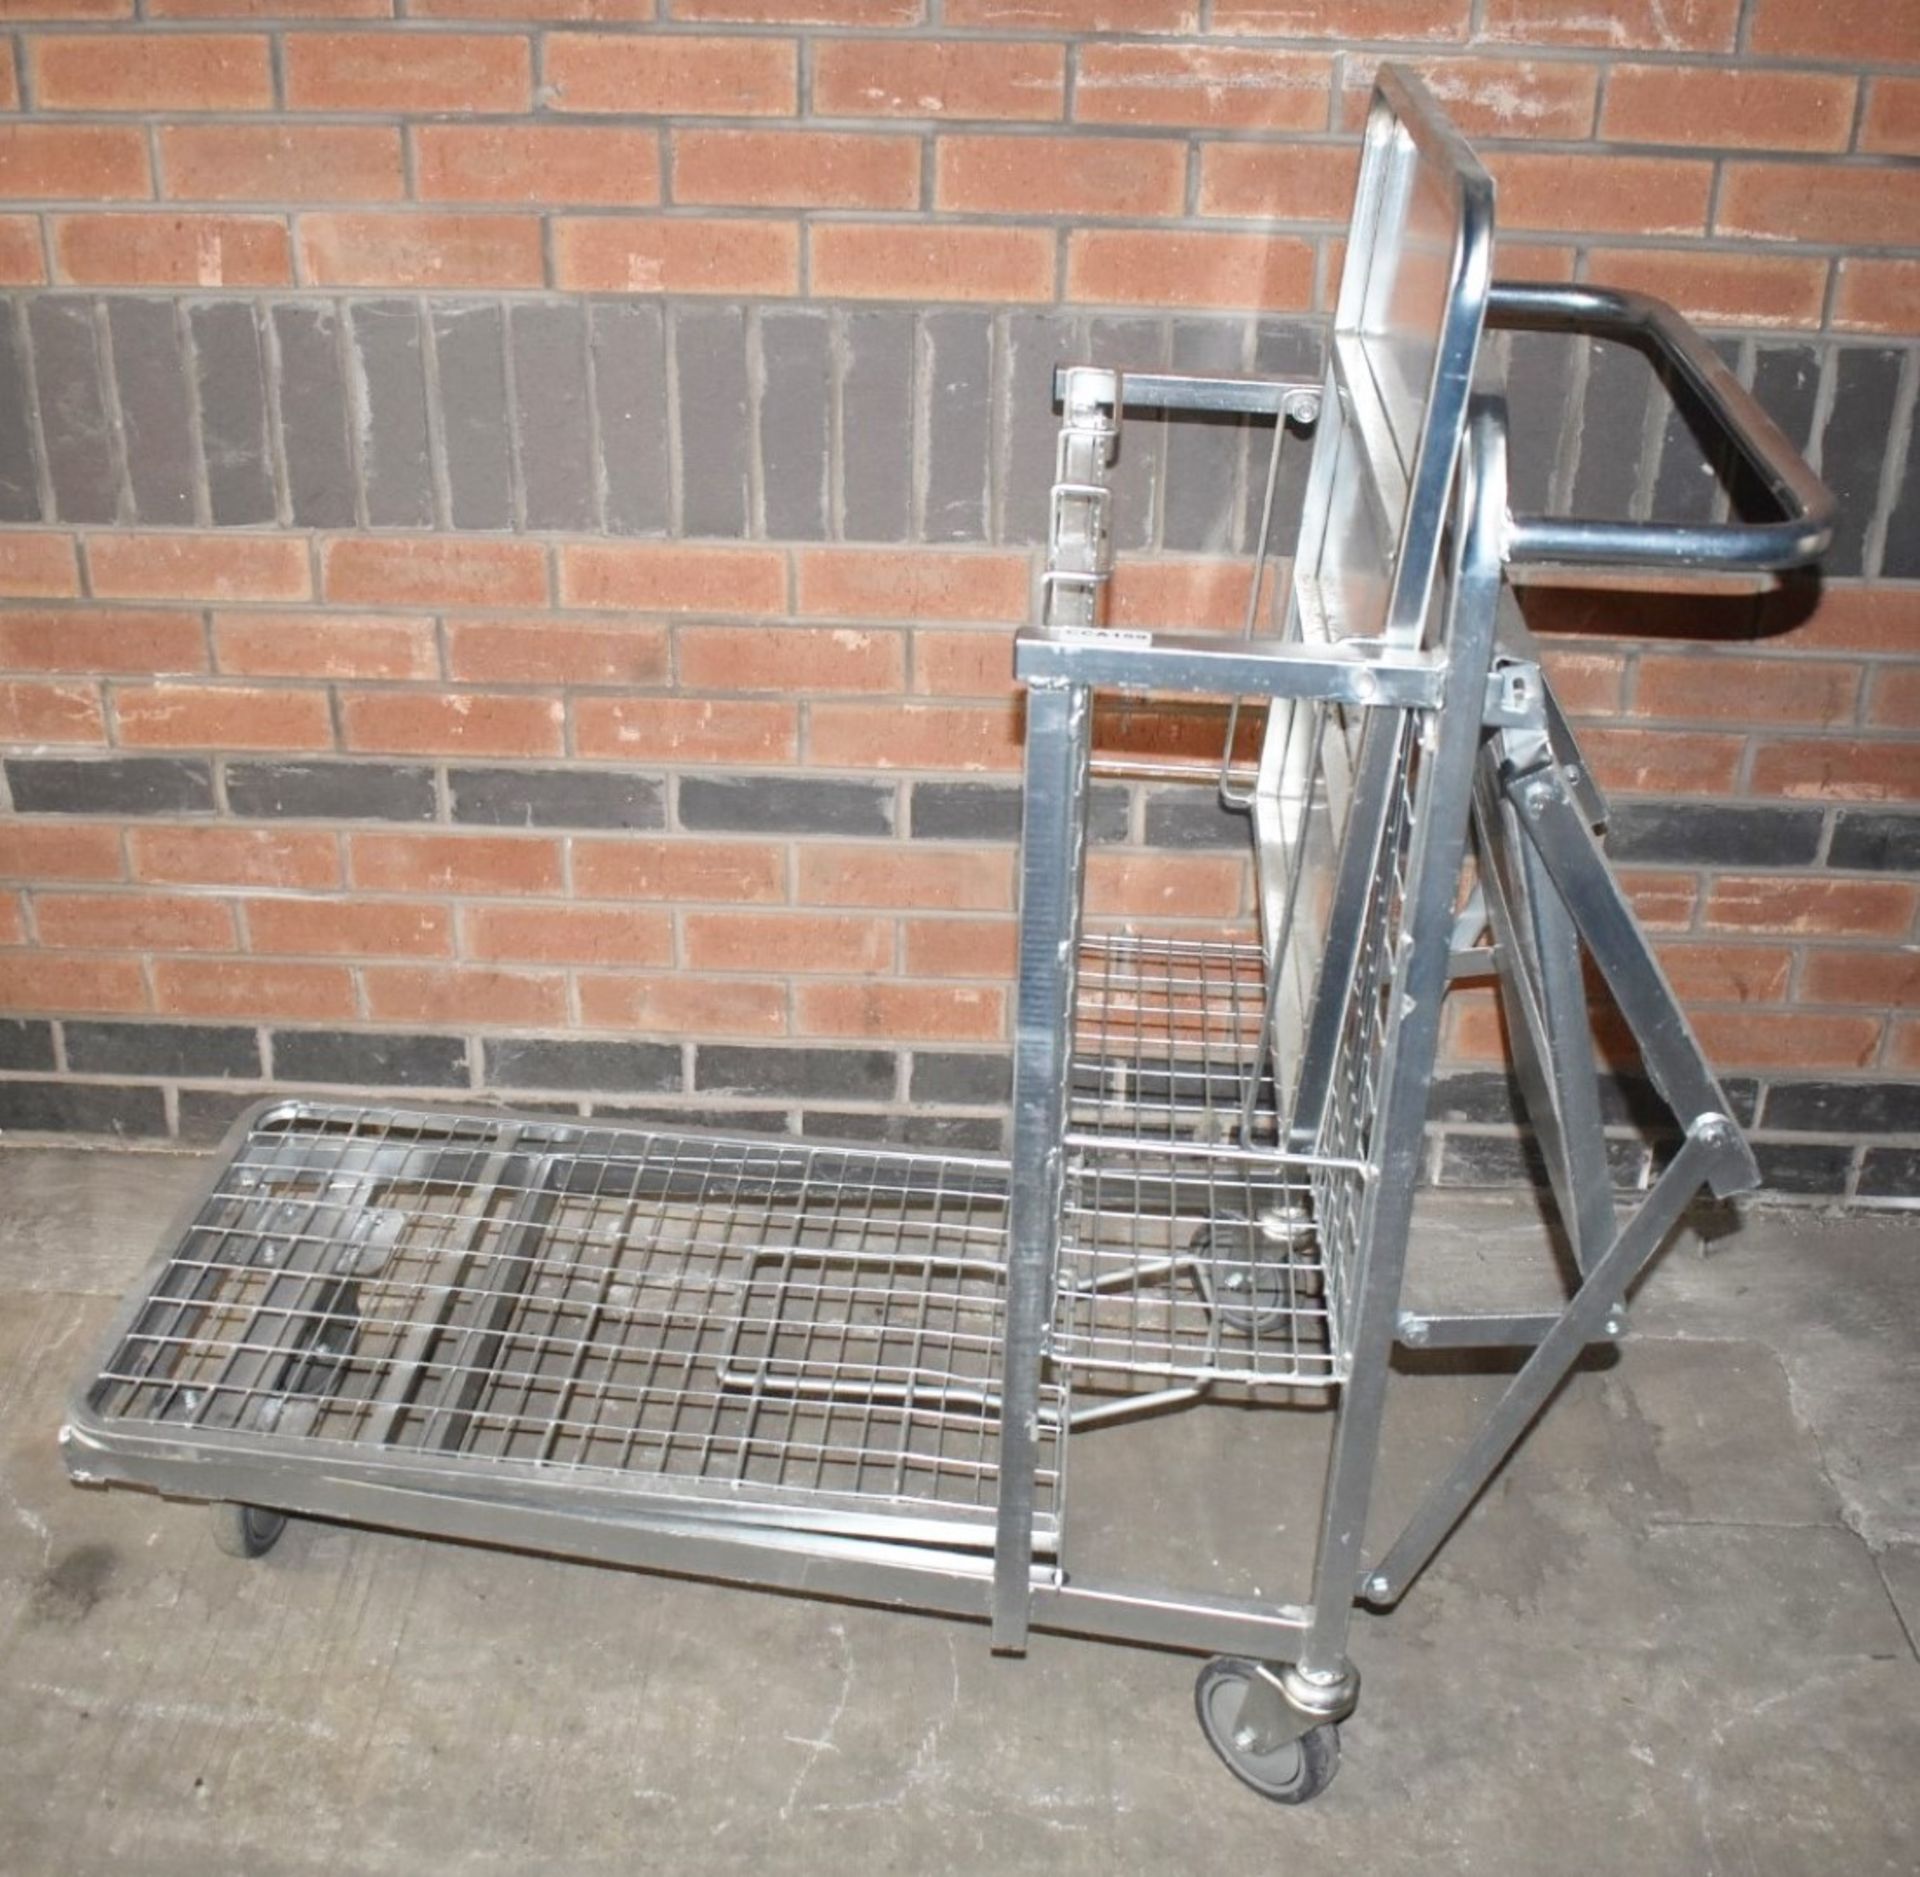 1 x Supermarket Retail Merchandising Trolley With Pull Out Step and Folding Shelf - Dimensions: - Image 11 of 12